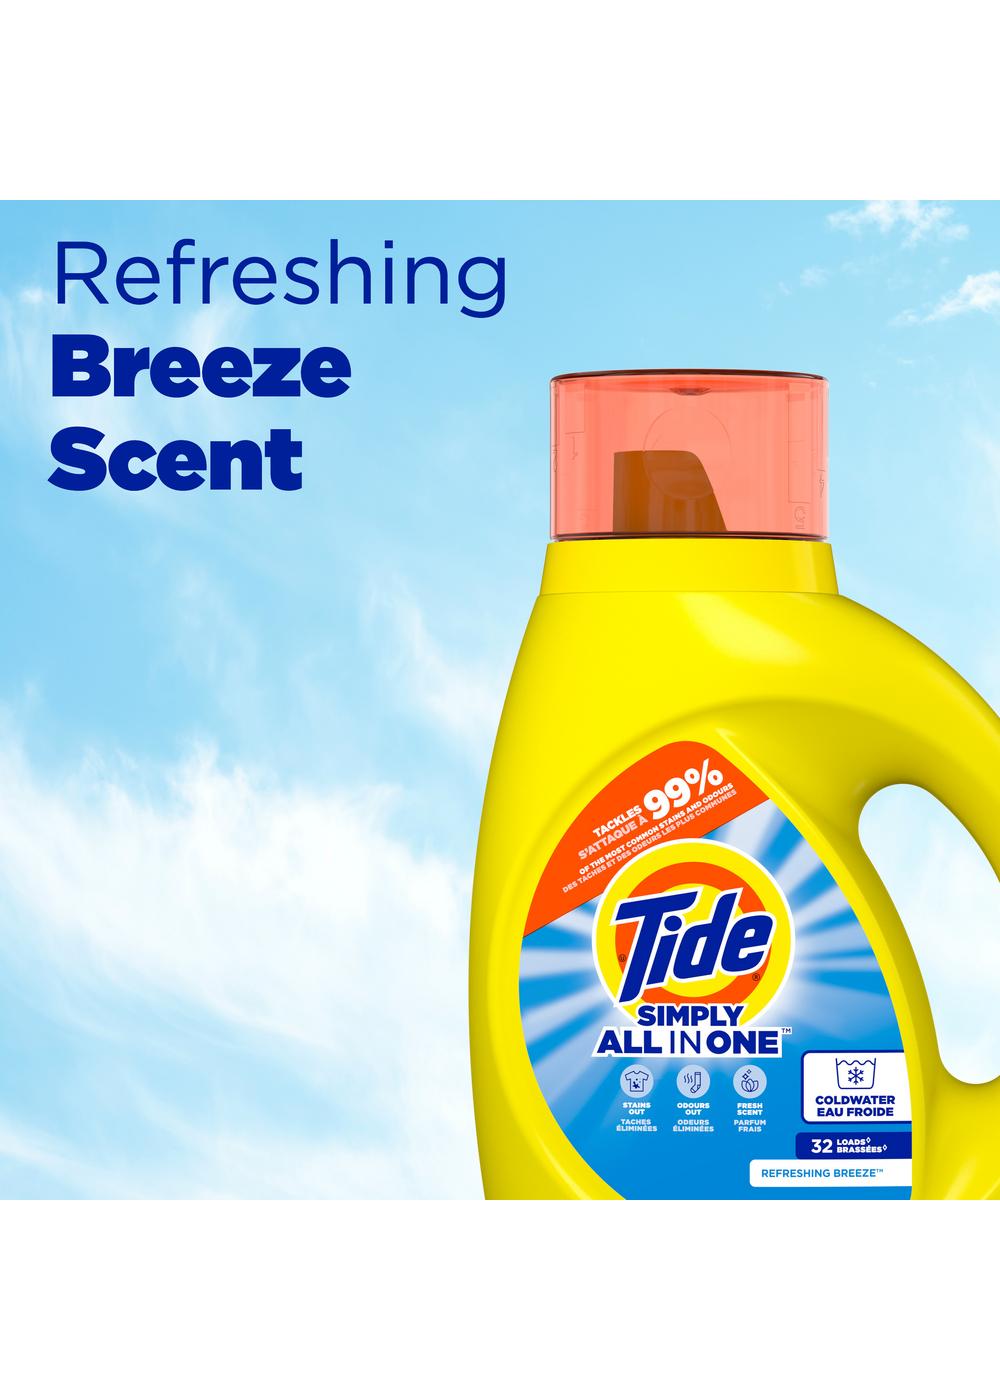 Tide Simply Clean & Fresh HE Liquid Laundry Detergent, 24 Loads - Refreshing Breeze; image 5 of 16